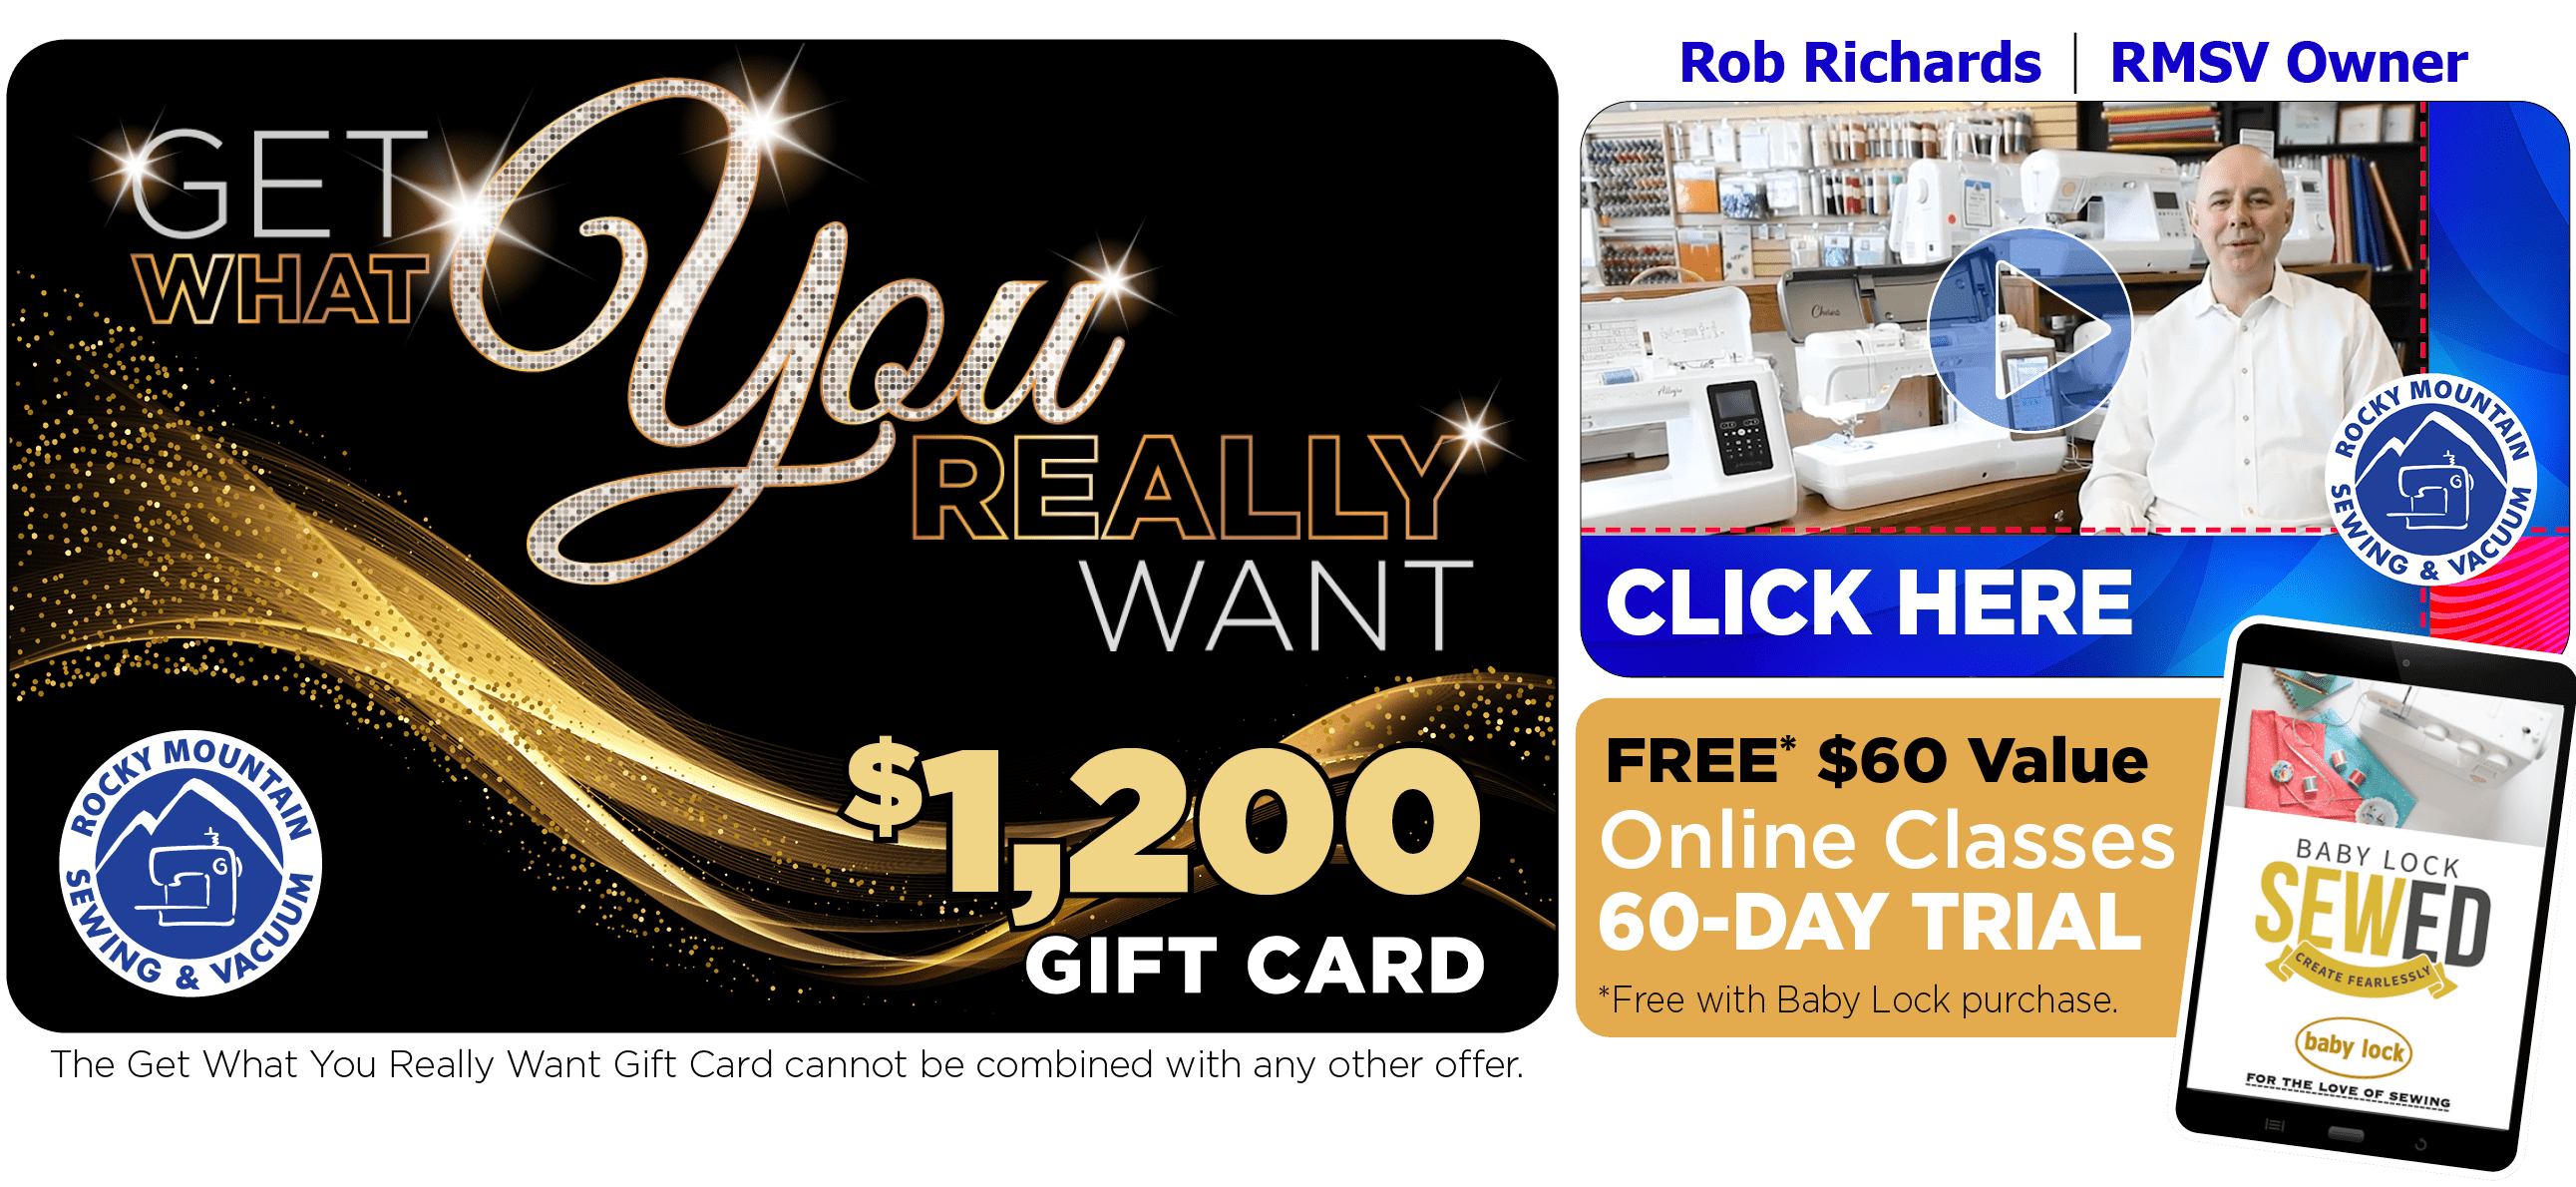 Get What You Really Want $1,200 Gift Card with Purchase